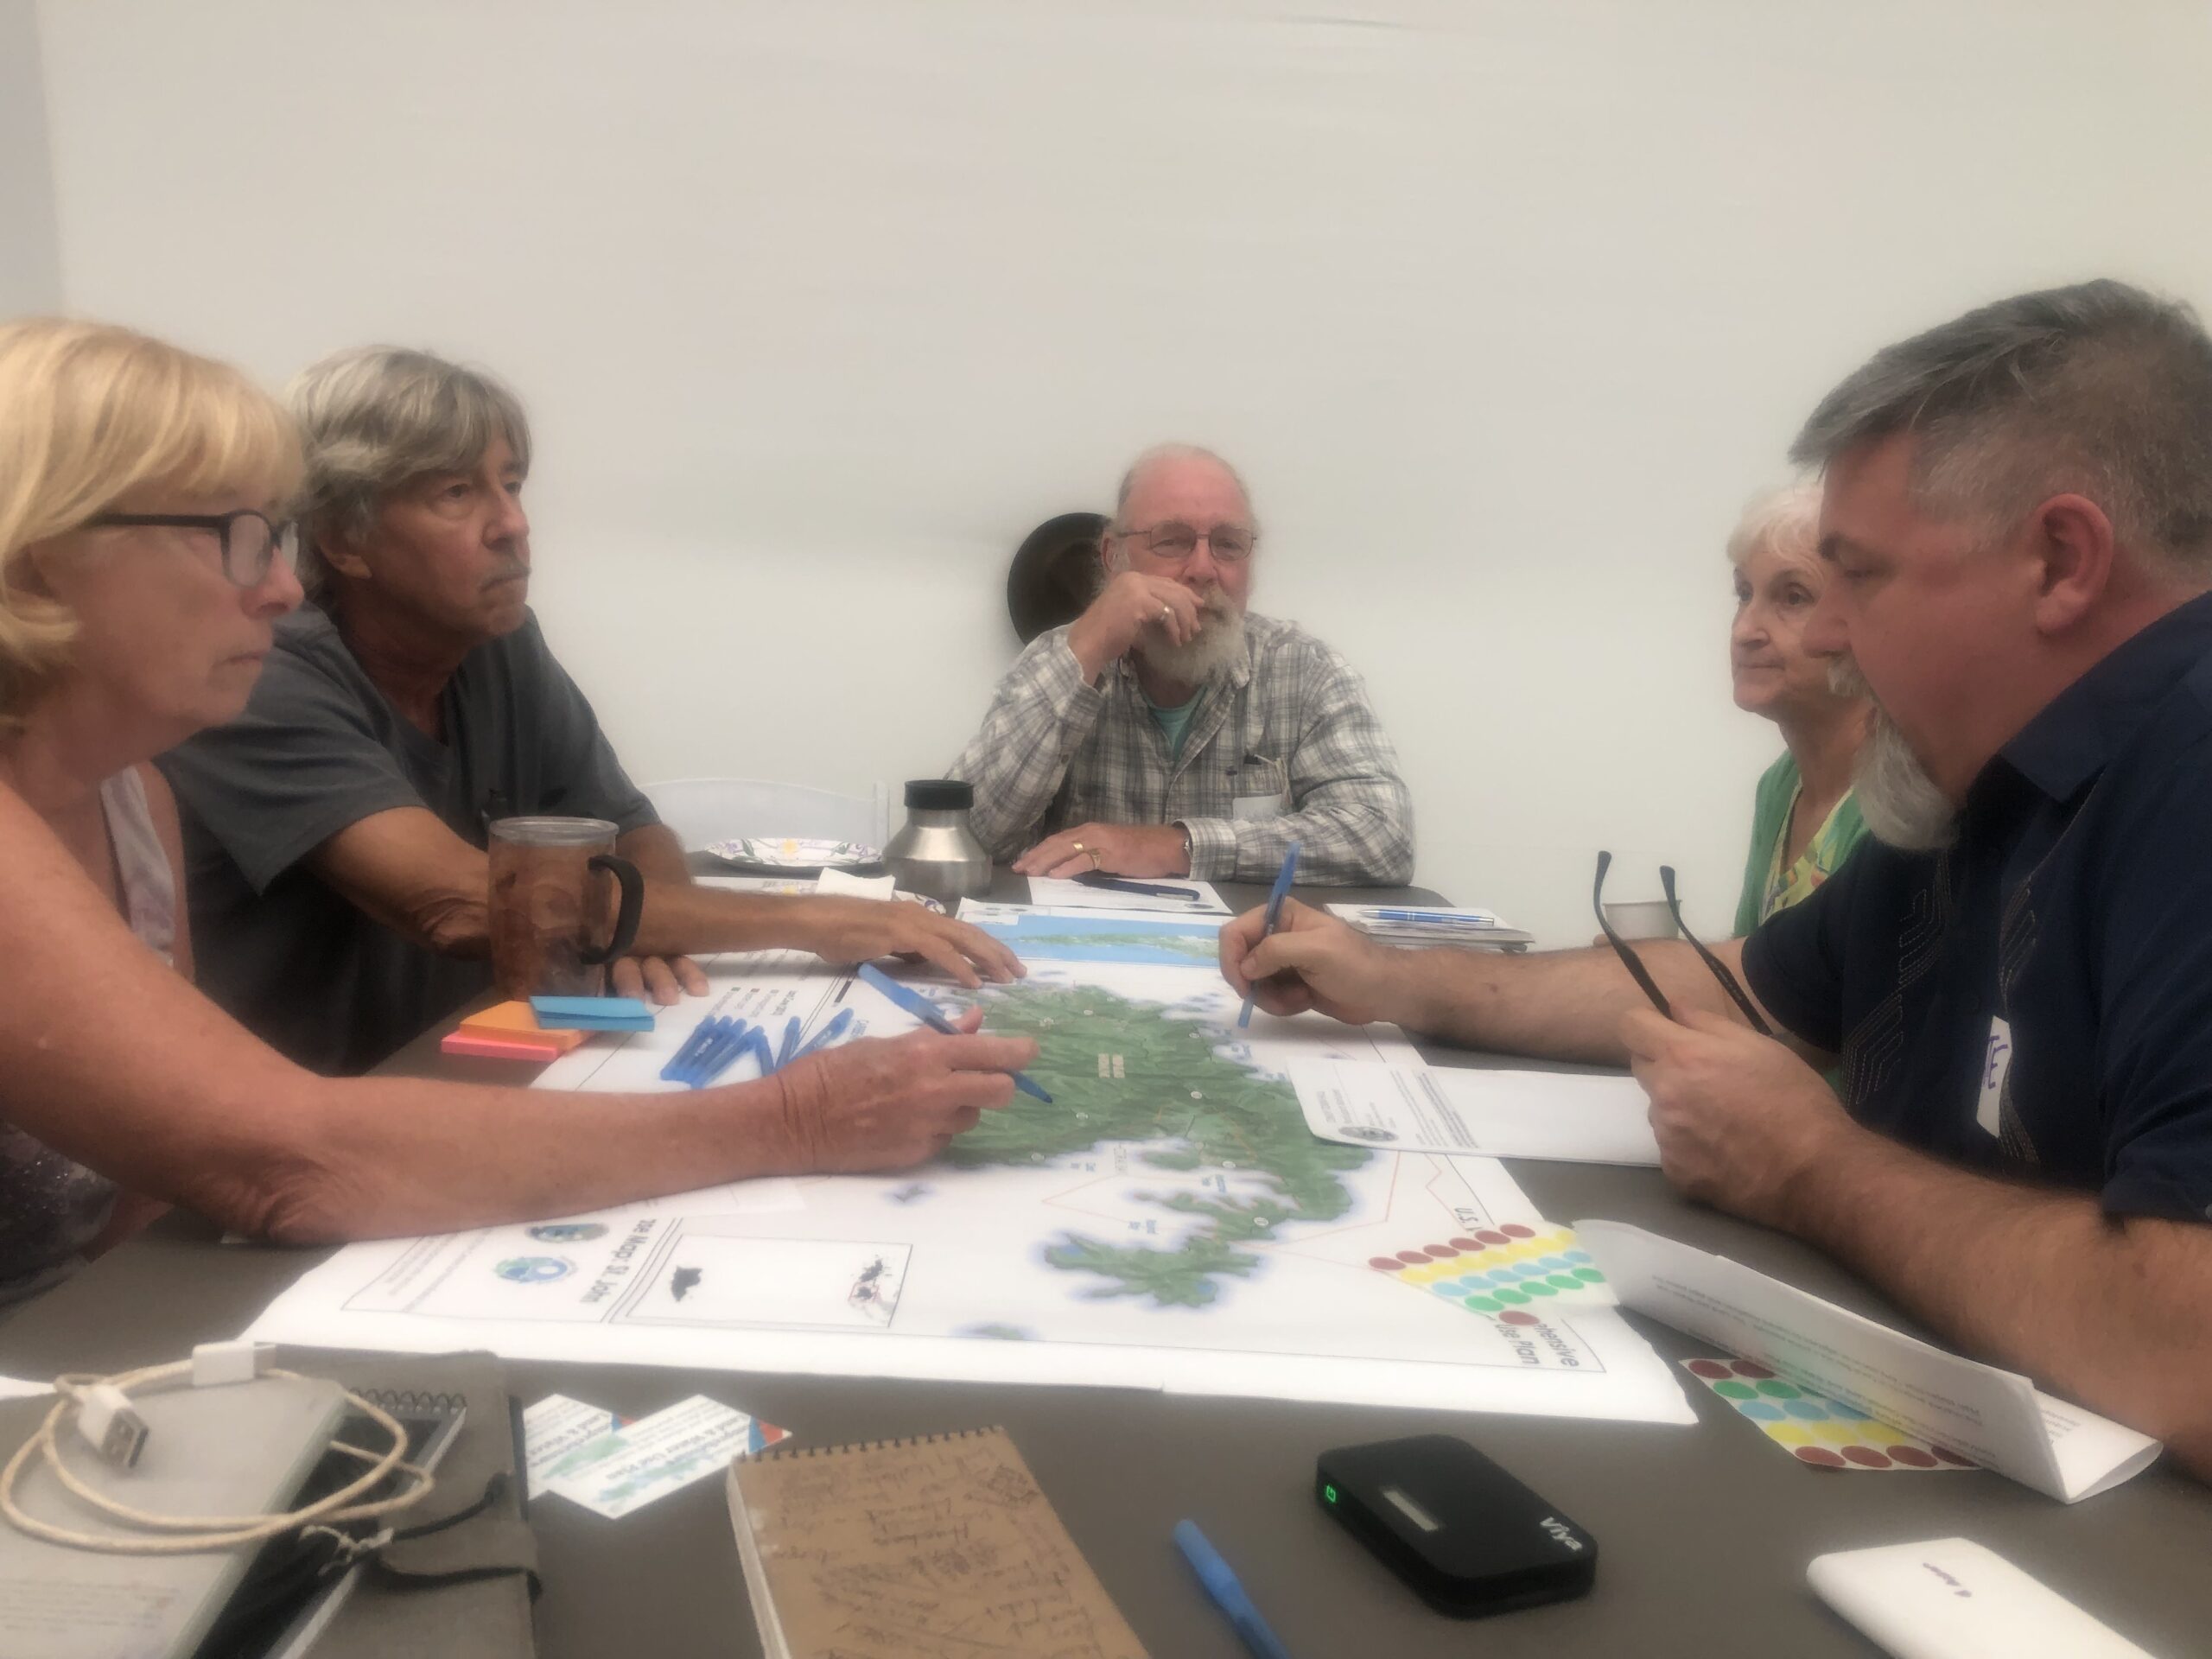 Nate Kelly, front right, guides St. John residents as they consider a comprehensive land and water use plan for St. John. (Source photo by Judi Shimel)